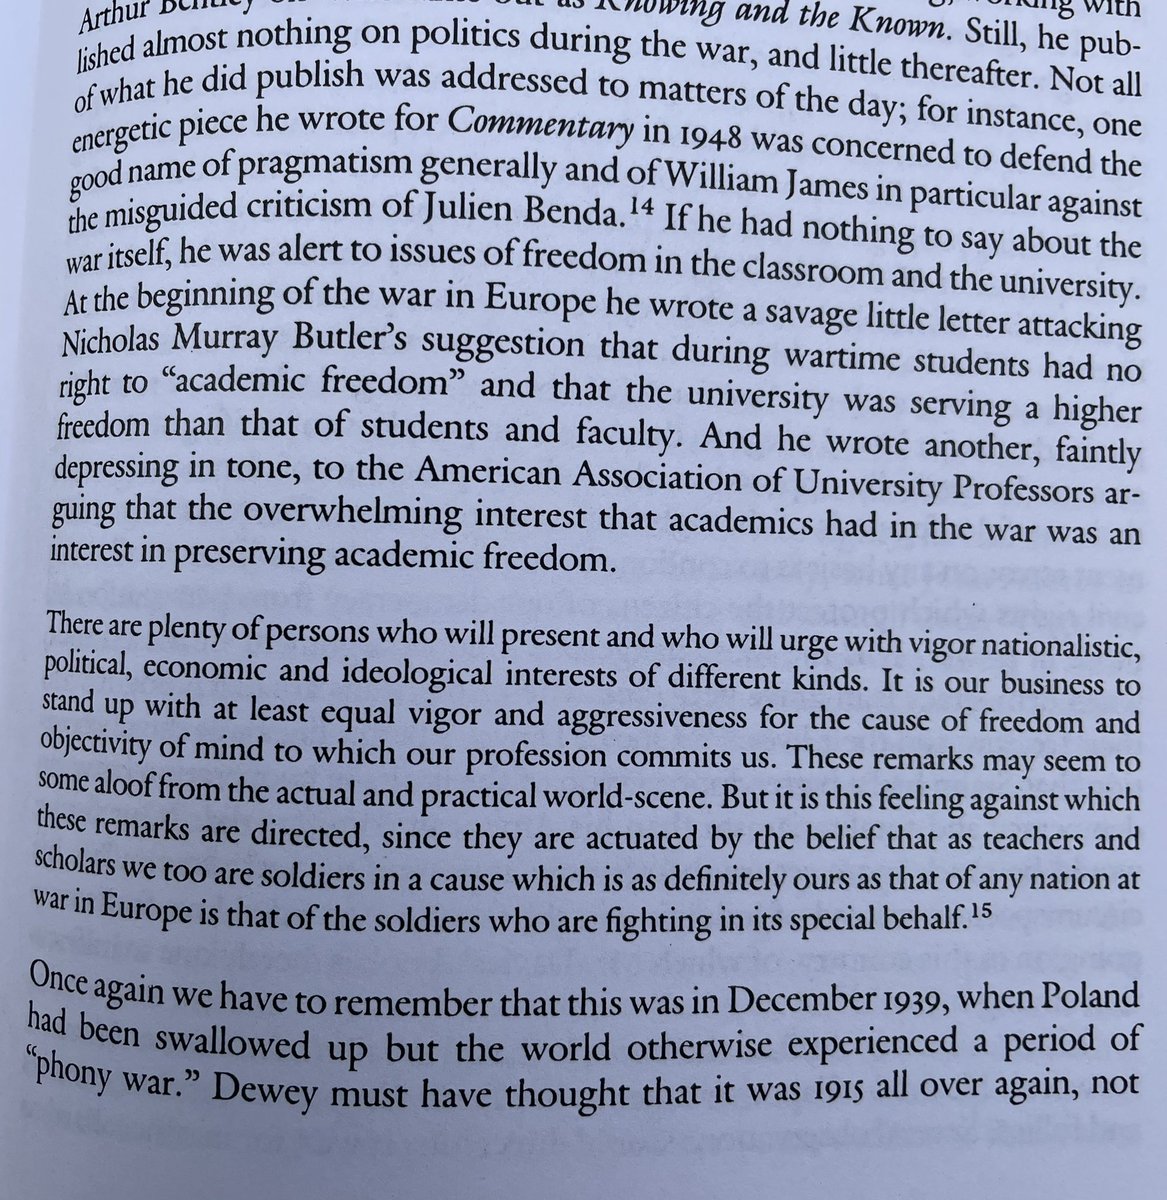 Dewey on academic freedom in US during WWII p.333 of Alan Ryan ‘s The High Tide of American Liberalism